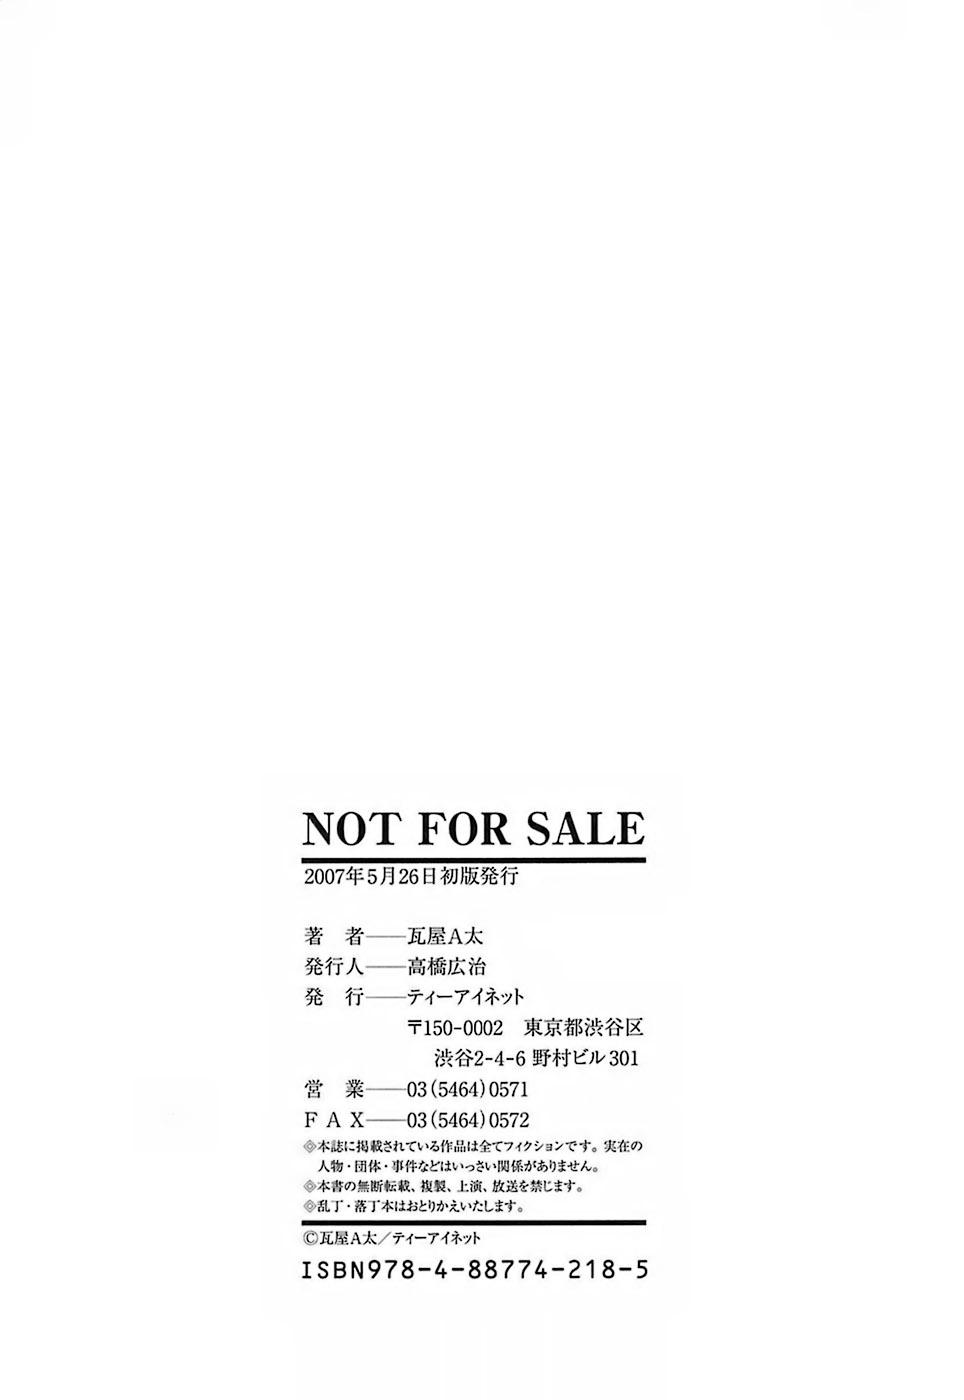 NOT FOR SALE 191